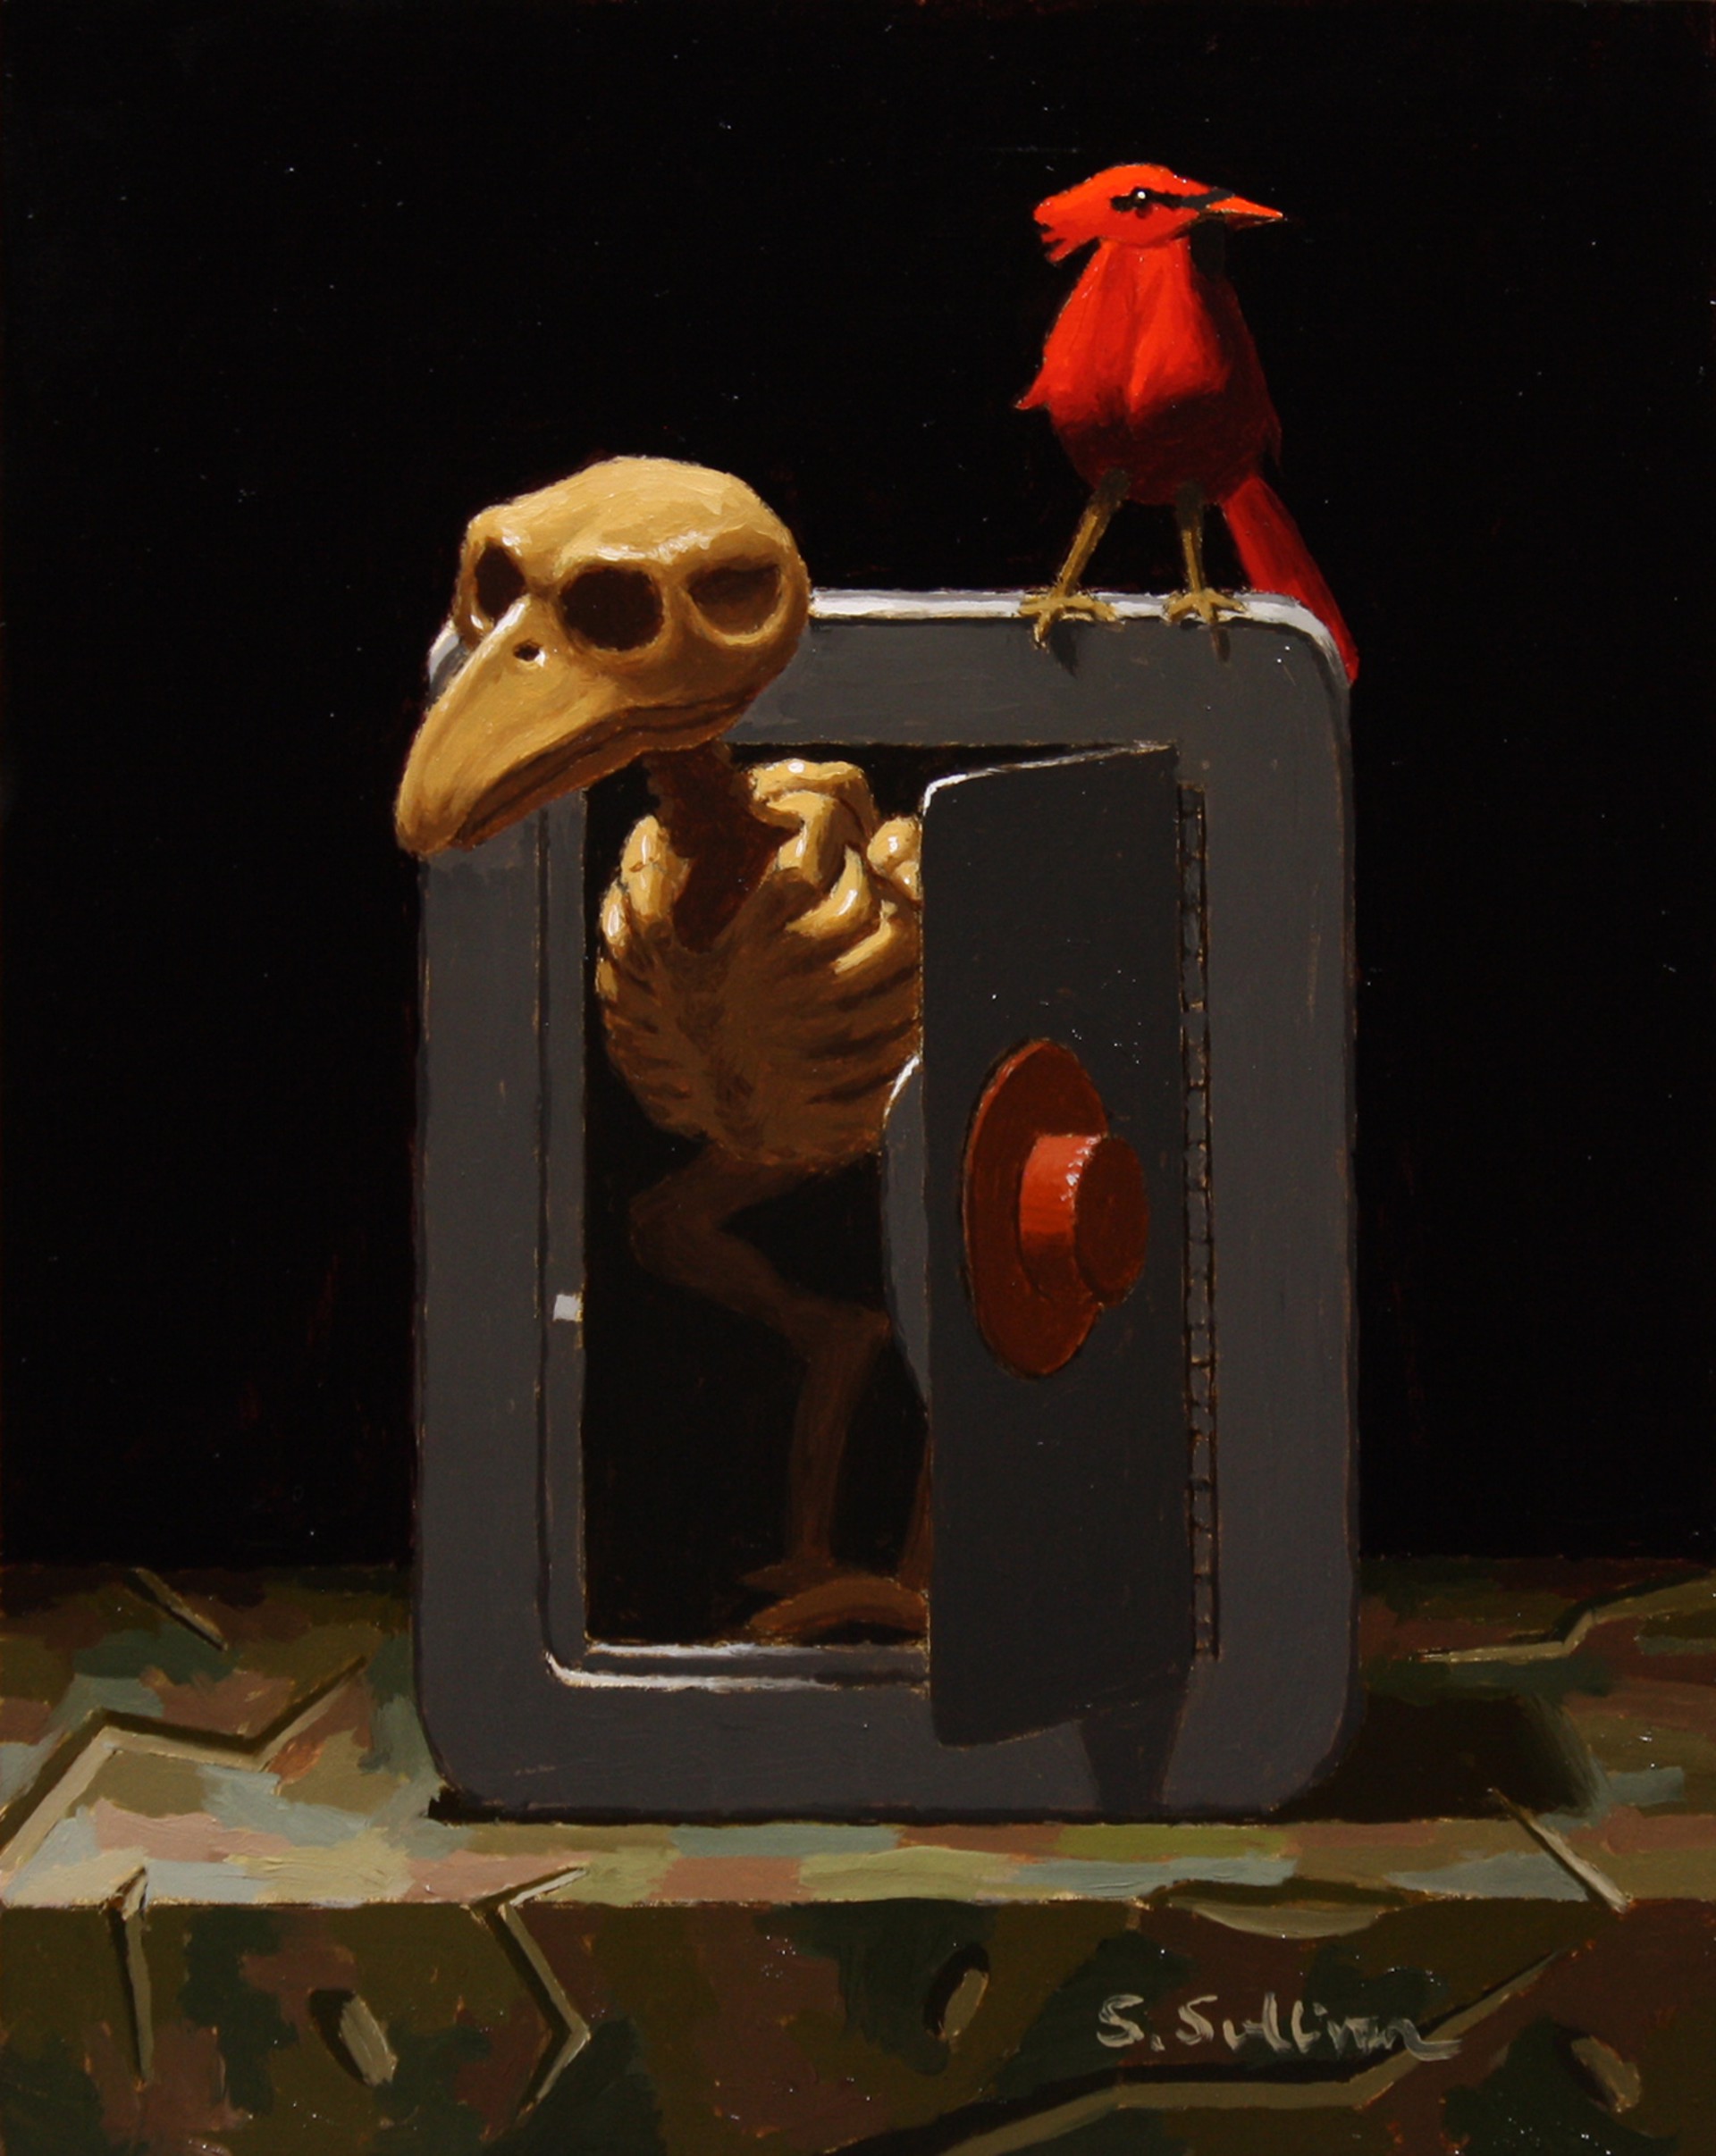 Skeleton in the Closet by Shawn Sullivan